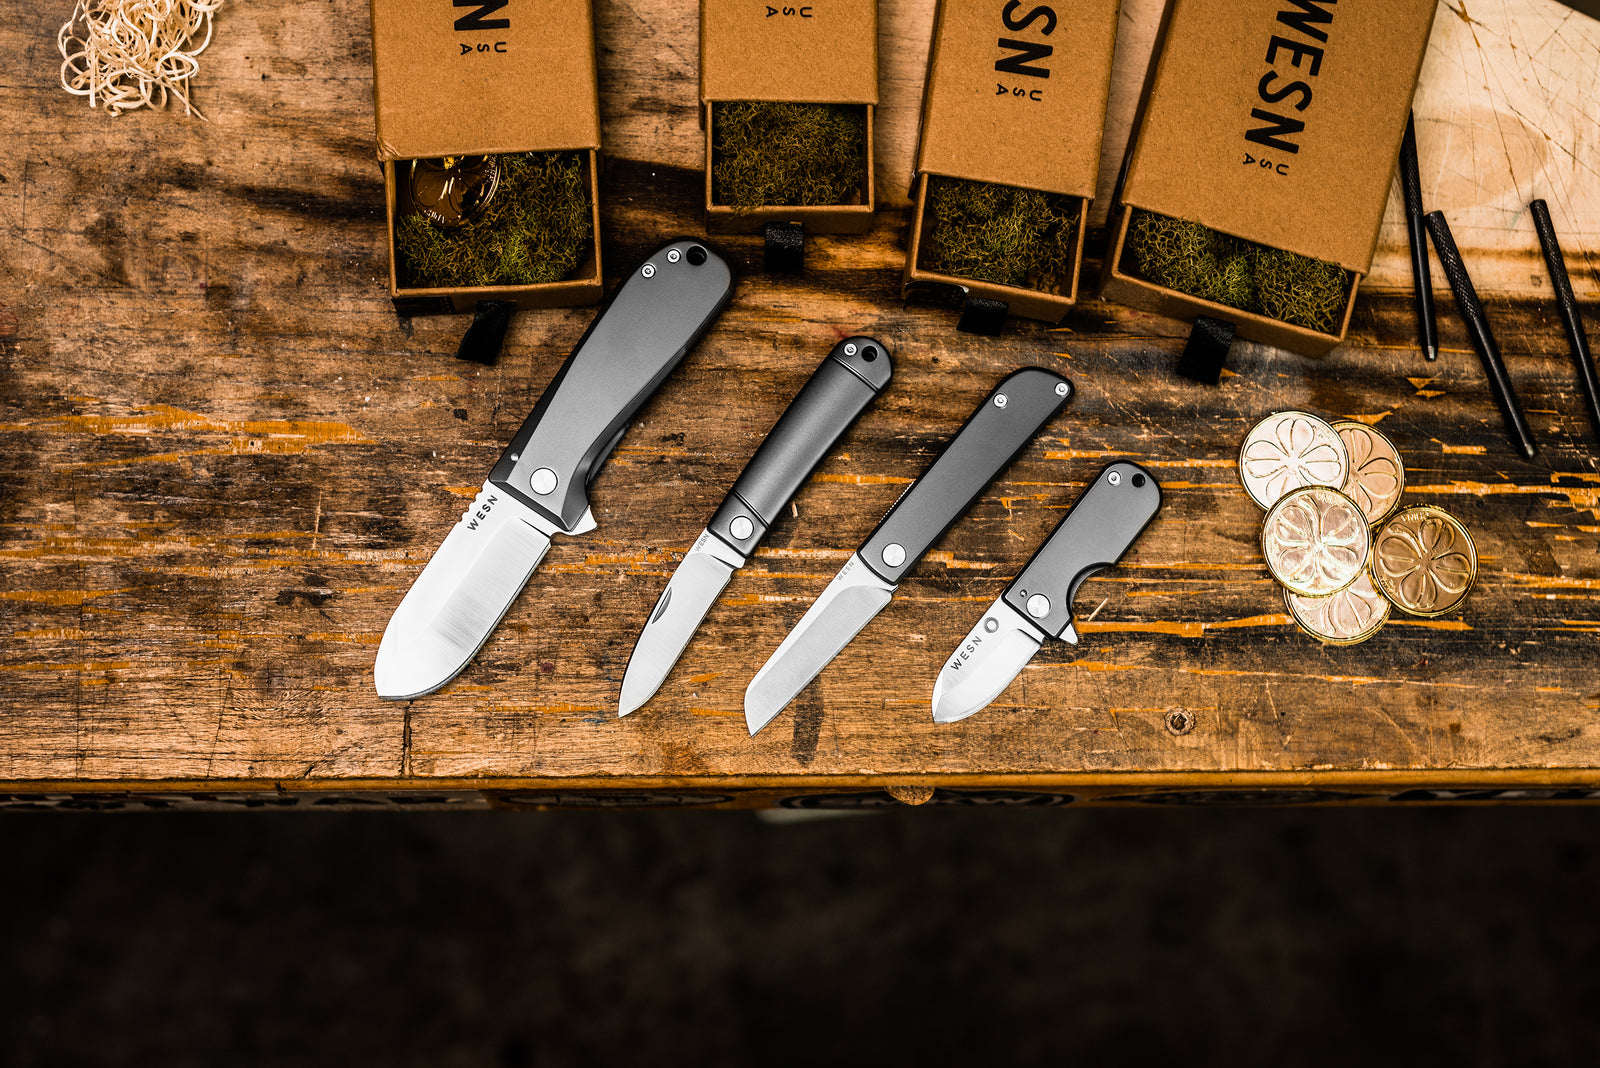 The WESN Titanium EDC Pocket Knife Collection